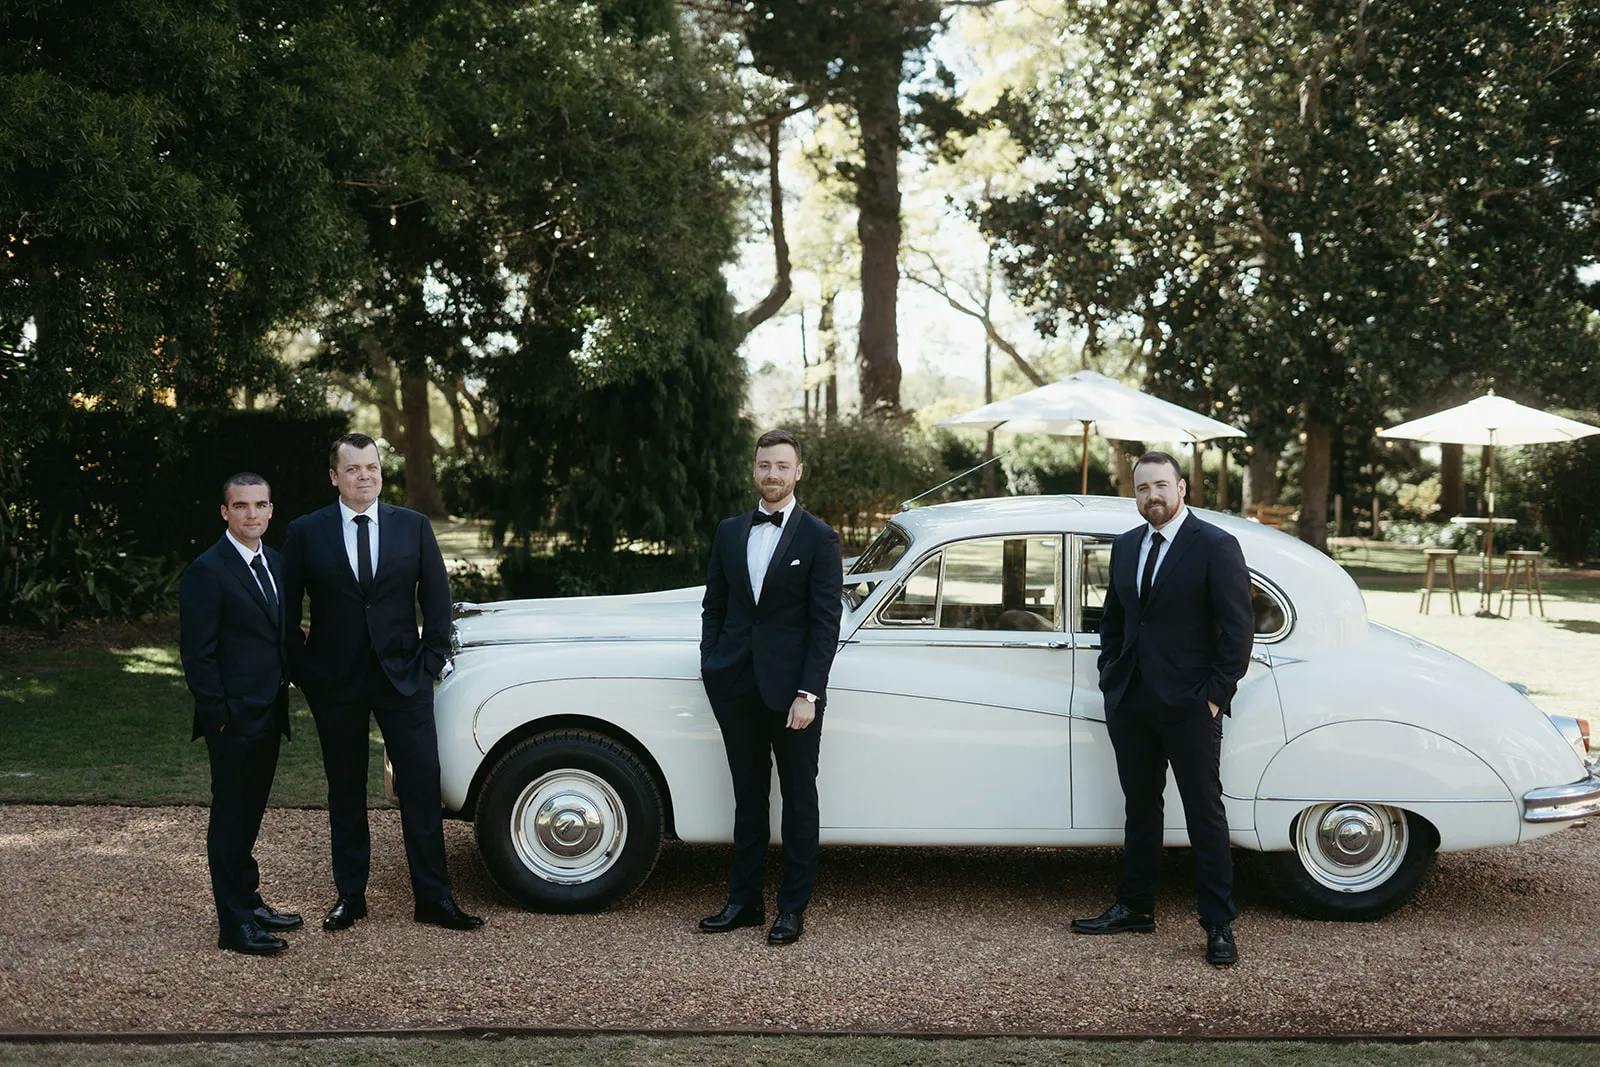 Four men dressed in formal suits stand in front of a vintage white car parked on a gravel path. Trees and a garden area with patio umbrellas are visible in the background. The men are posed casually, with two slightly leaning on the car.